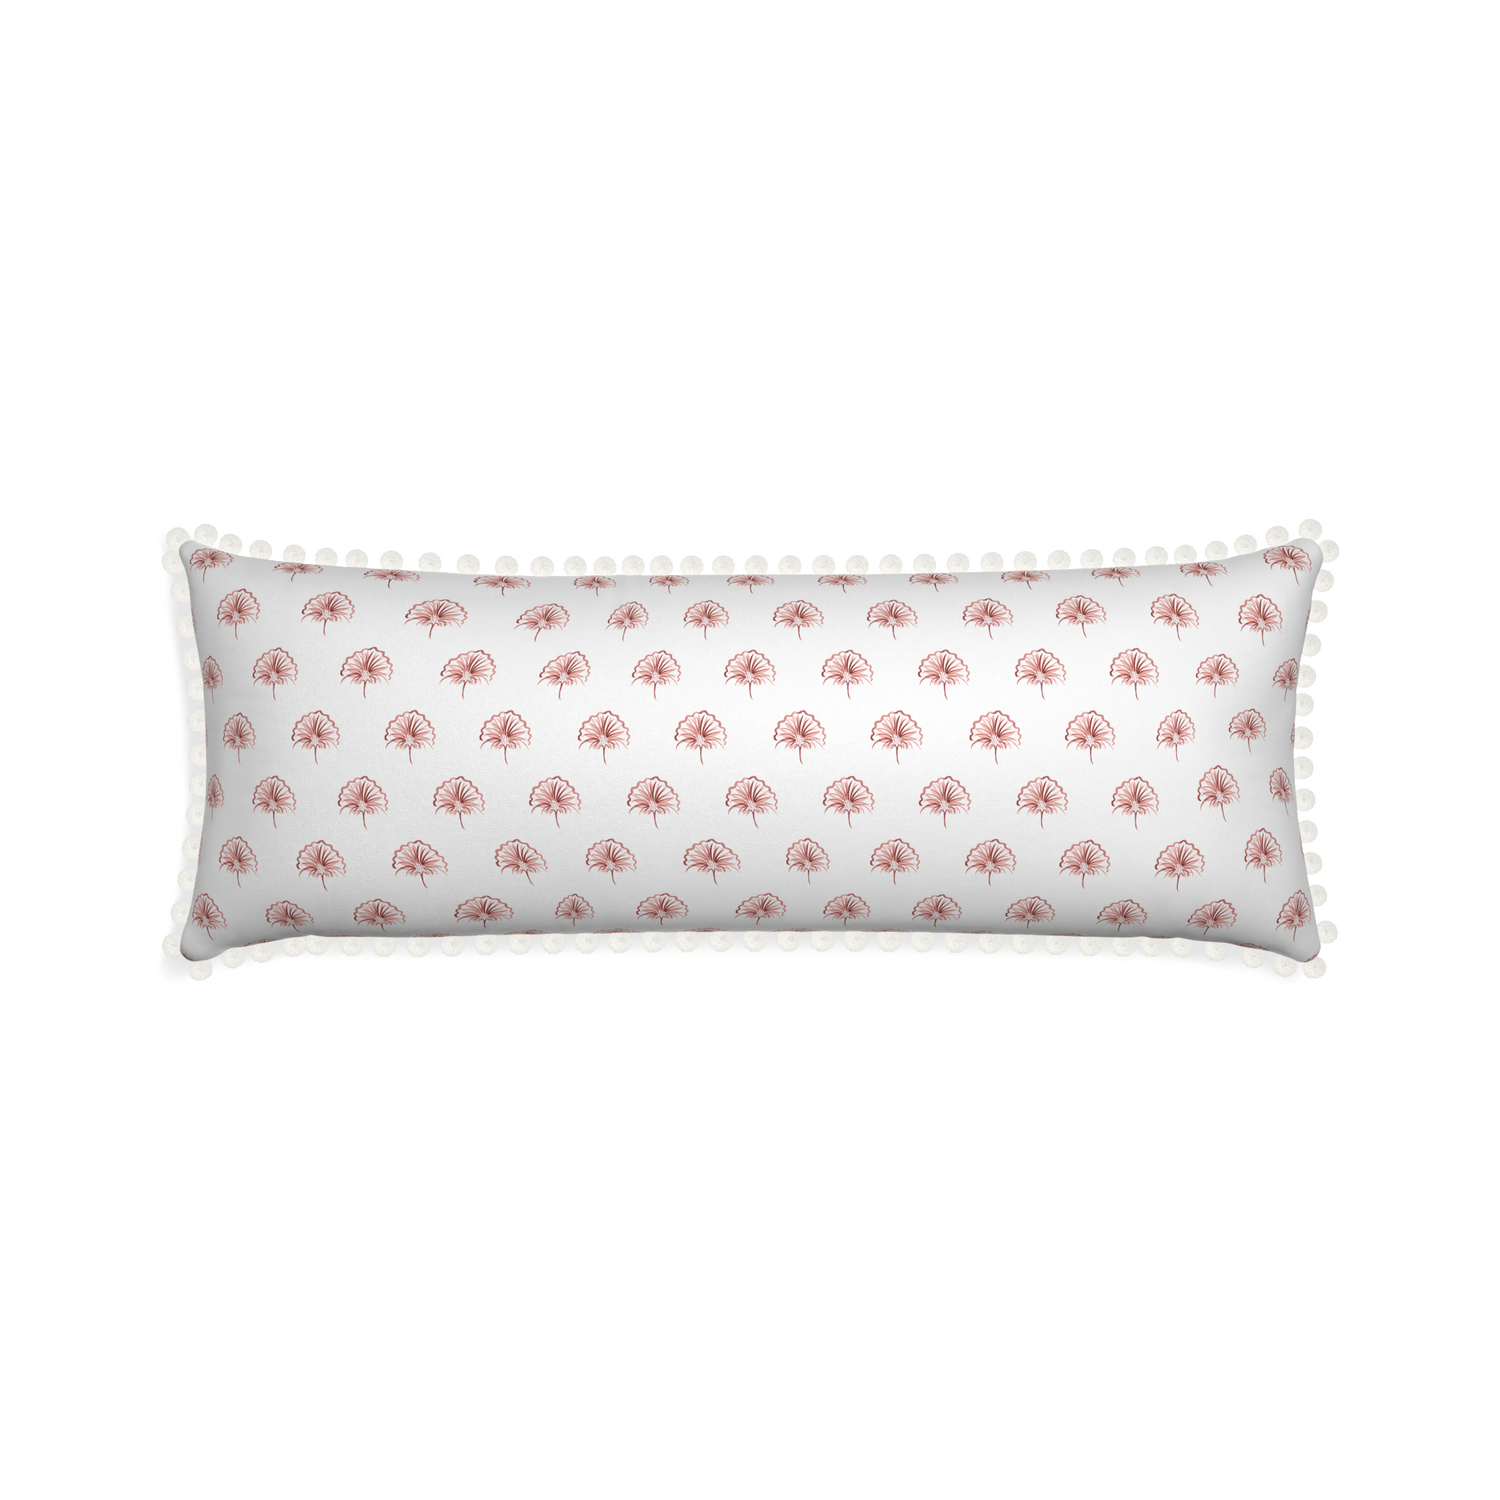 Xl-lumbar penelope rose custom floral pinkpillow with snow pom pom on white background